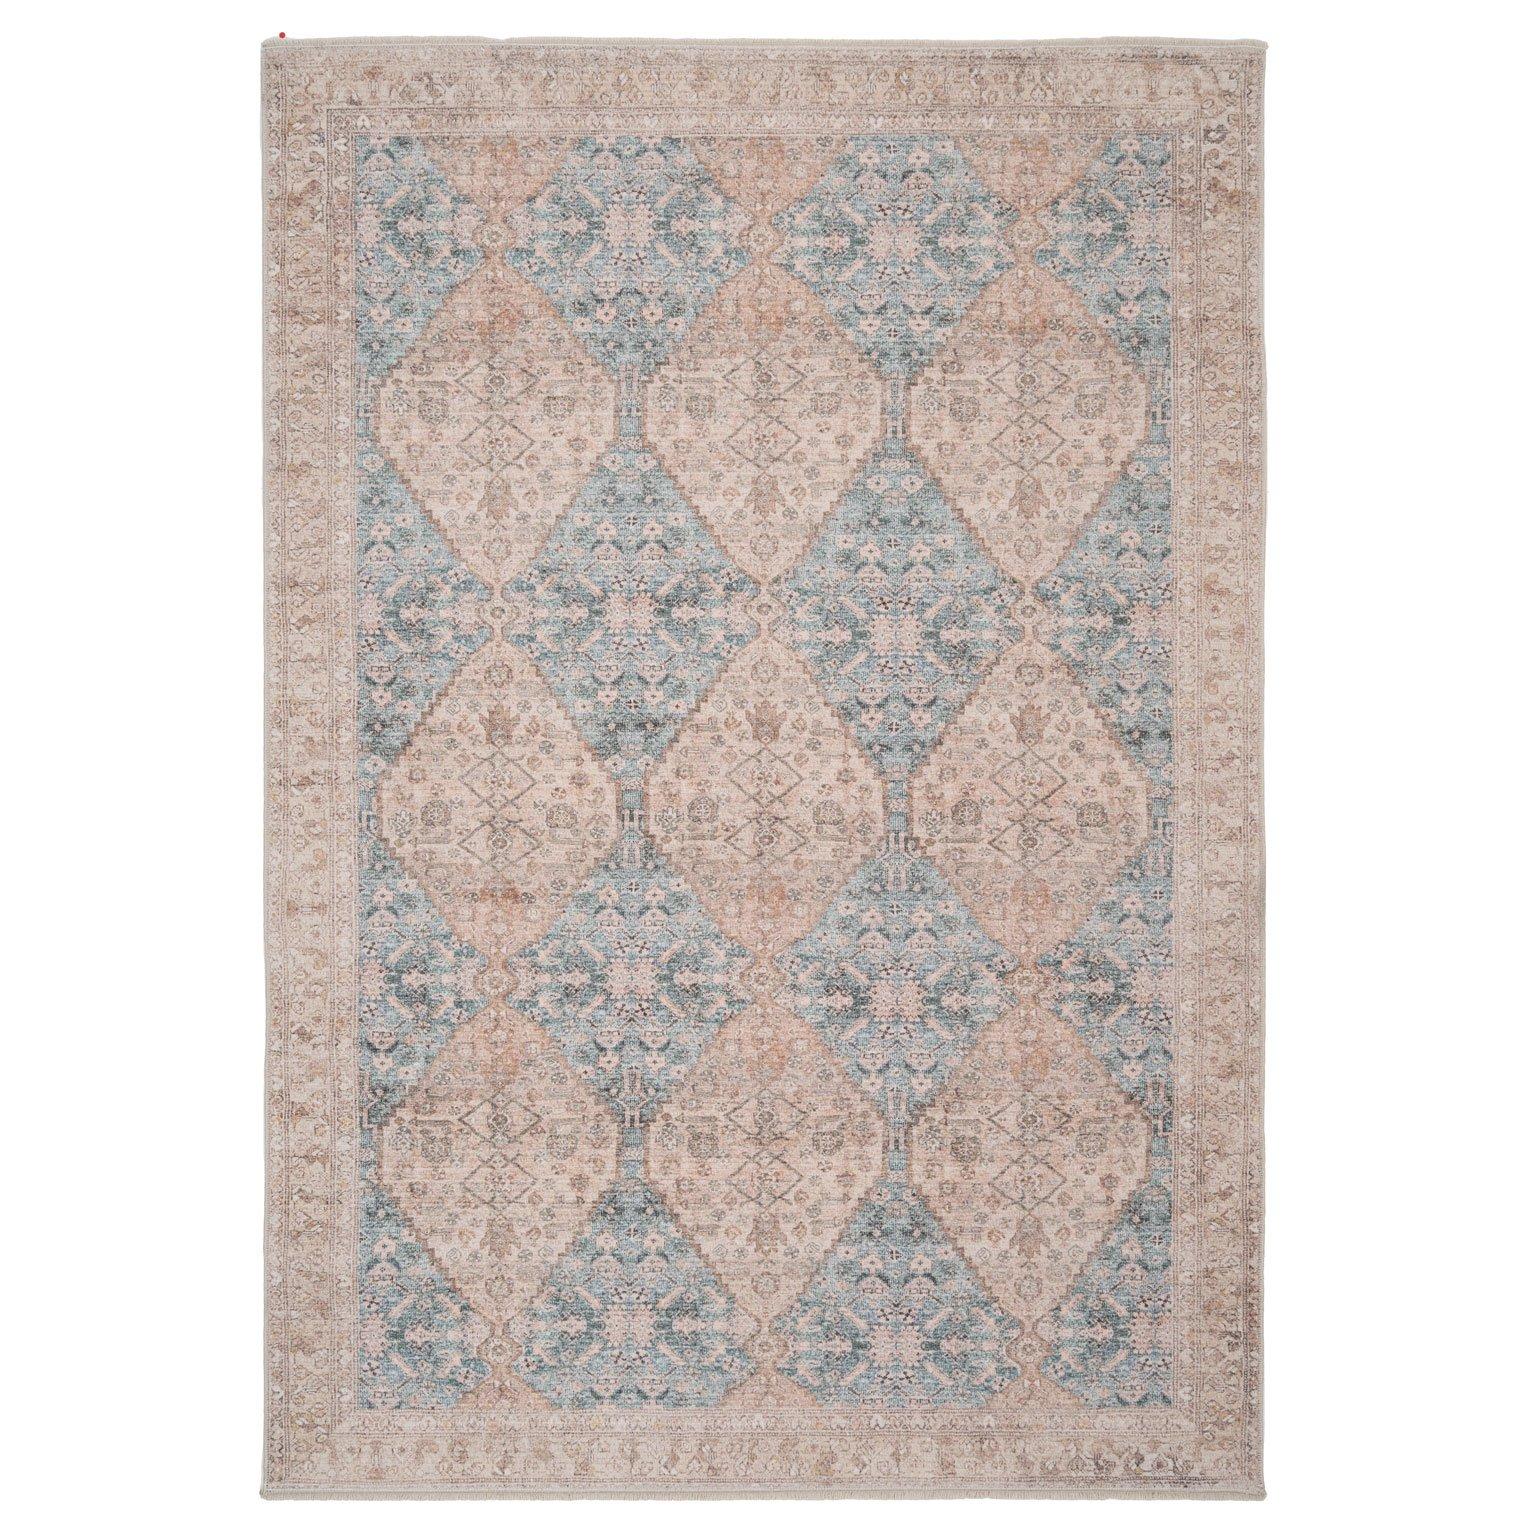 Blue Beige Traditional Pattern Distressed Living Area Rug